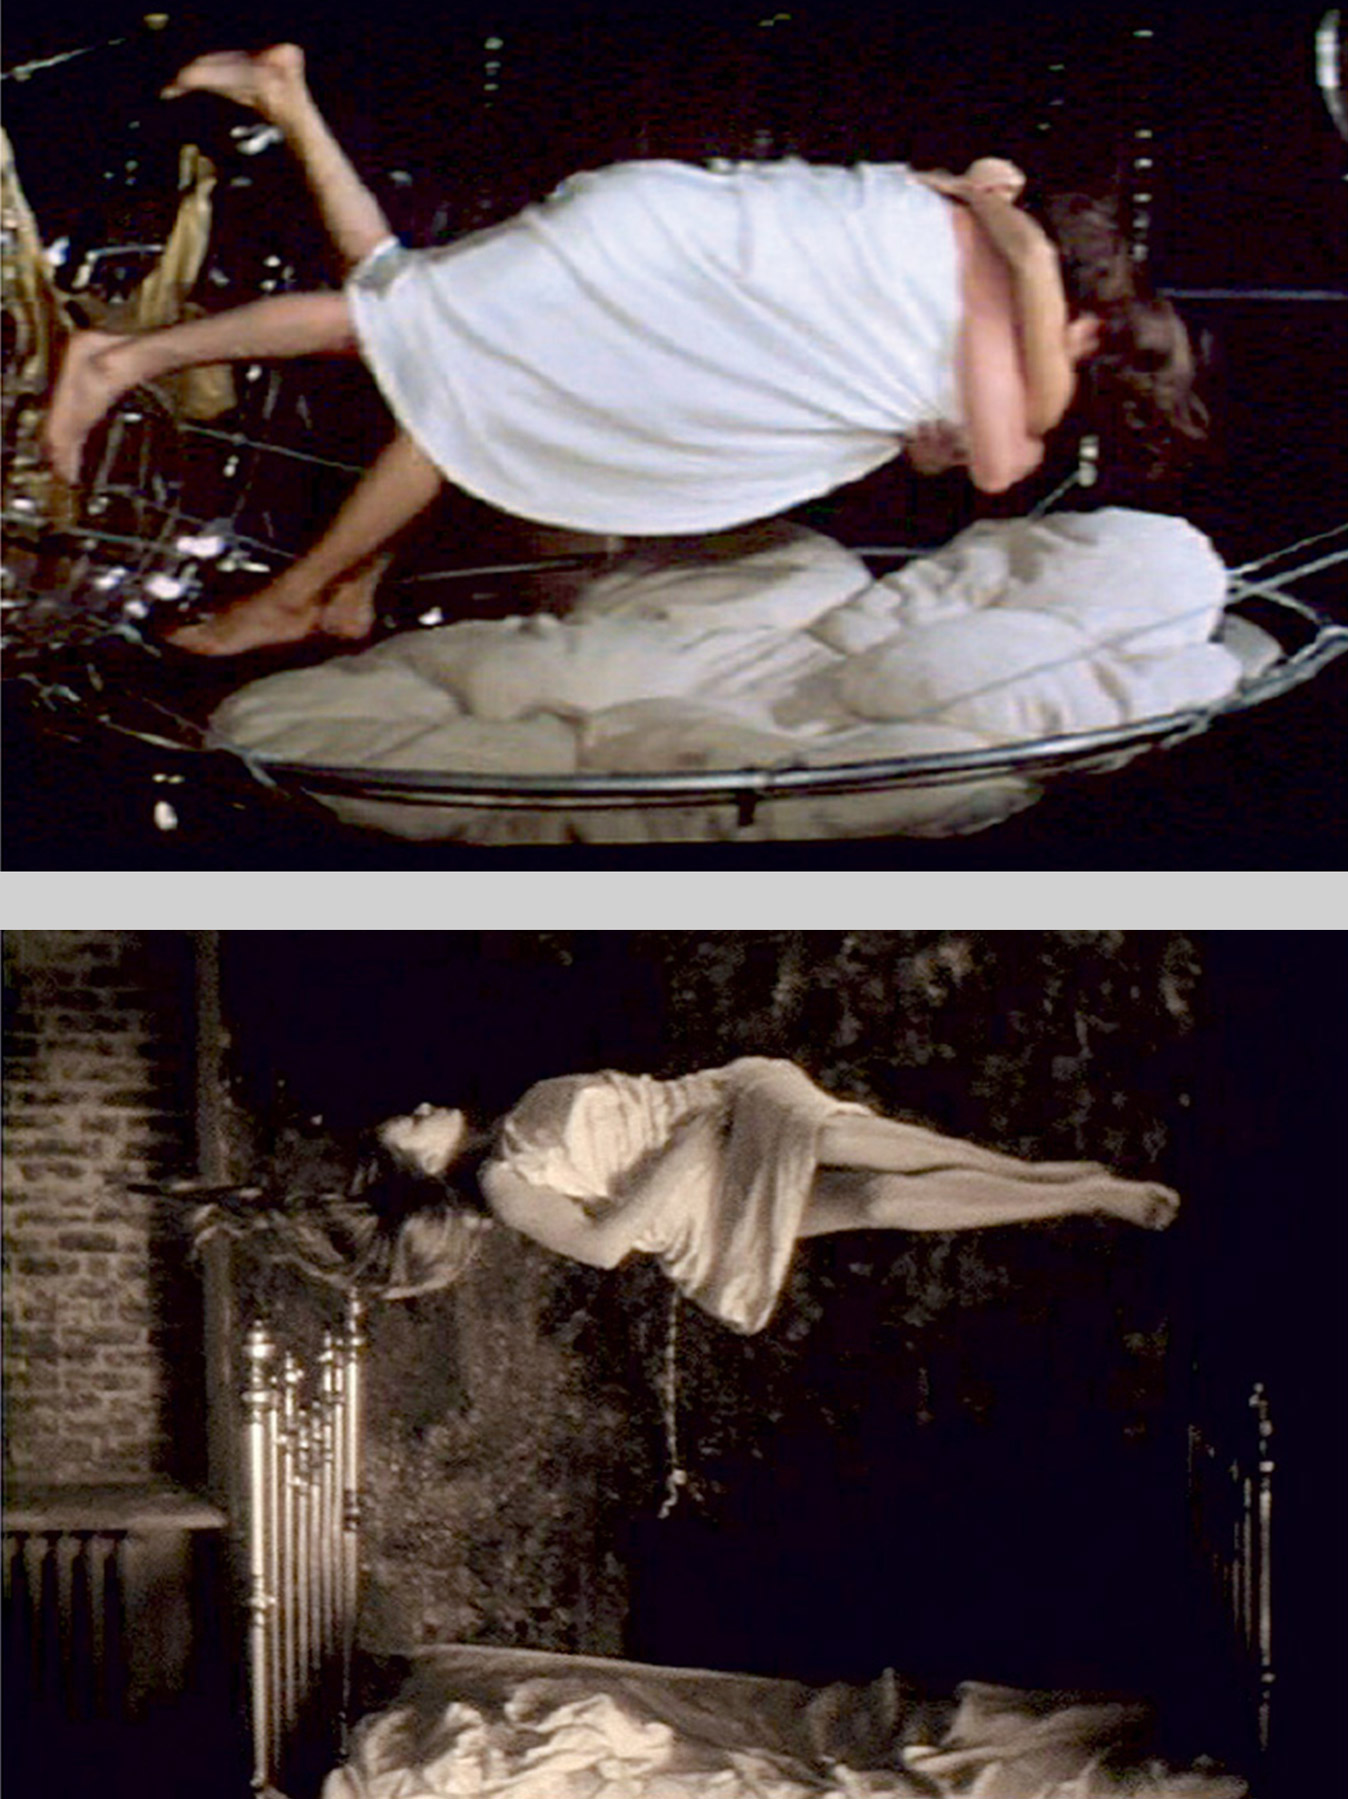 above: James Bond levitates in orbit with Holly Goodhead in Lewis Gilbert’s Moonraker, 1979; below: The miracle of love as levitation in Andrei Tarkovsky, The Mirror, 1975.